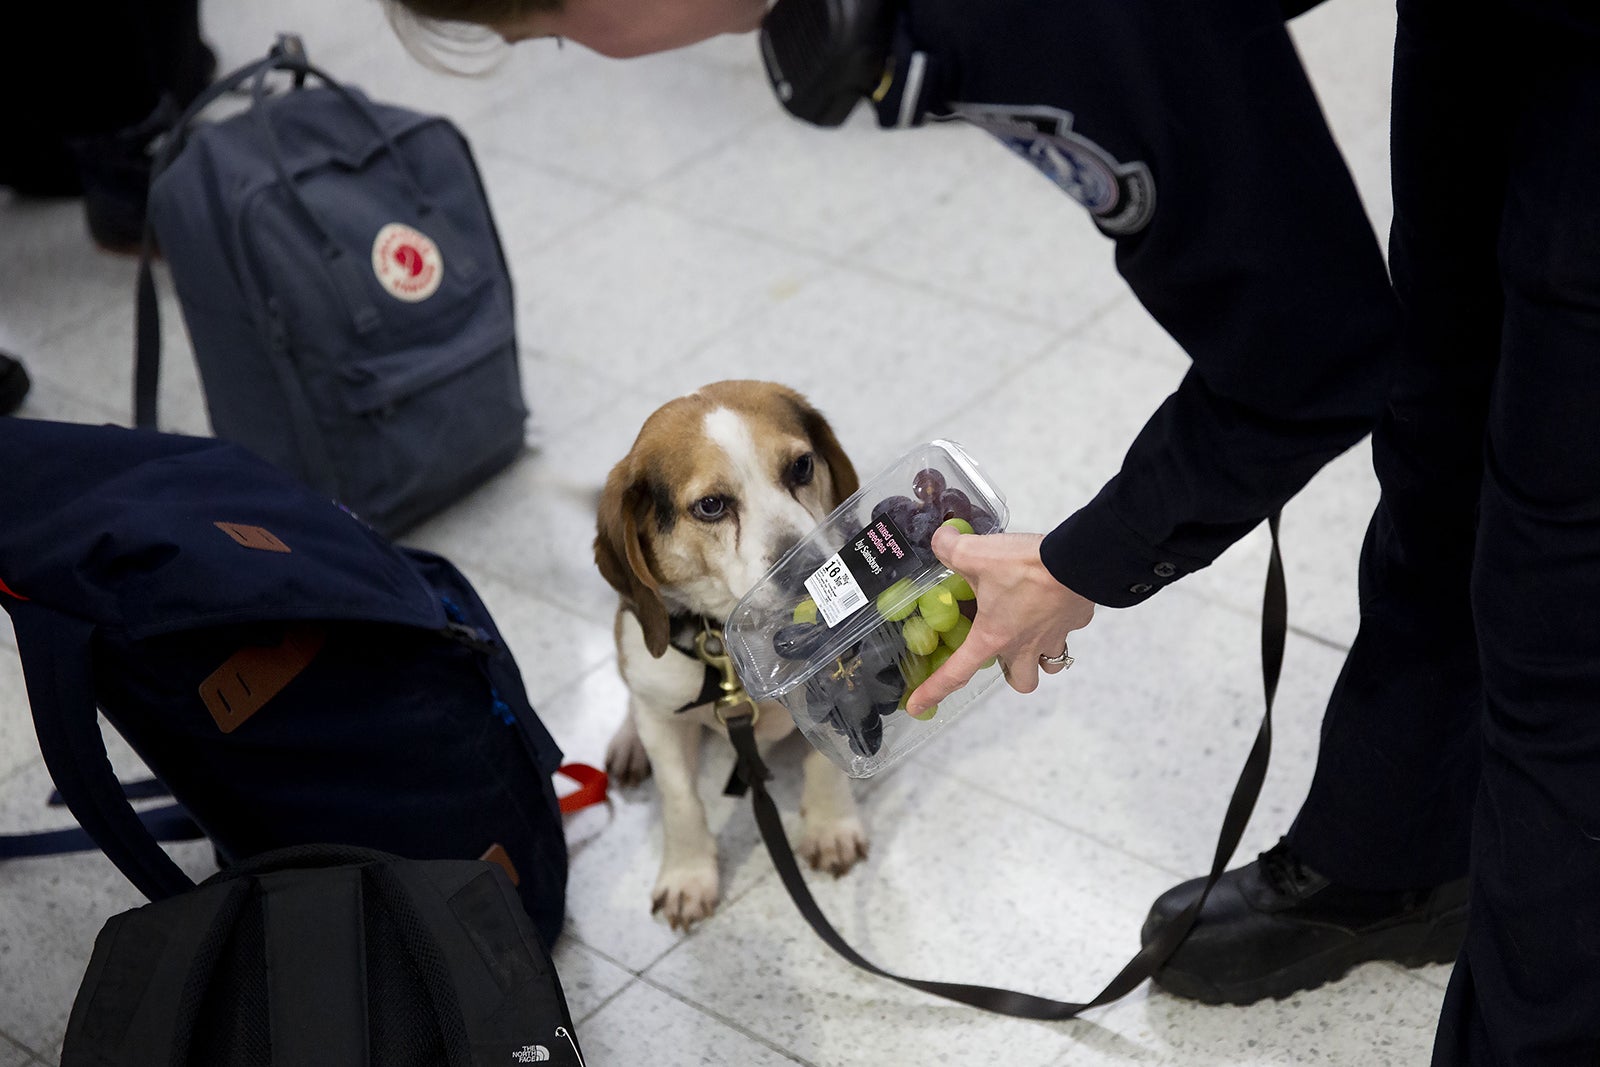 America's Best Bet To Avoid A Deadly Pig Virus May Be Sniffer Beagles